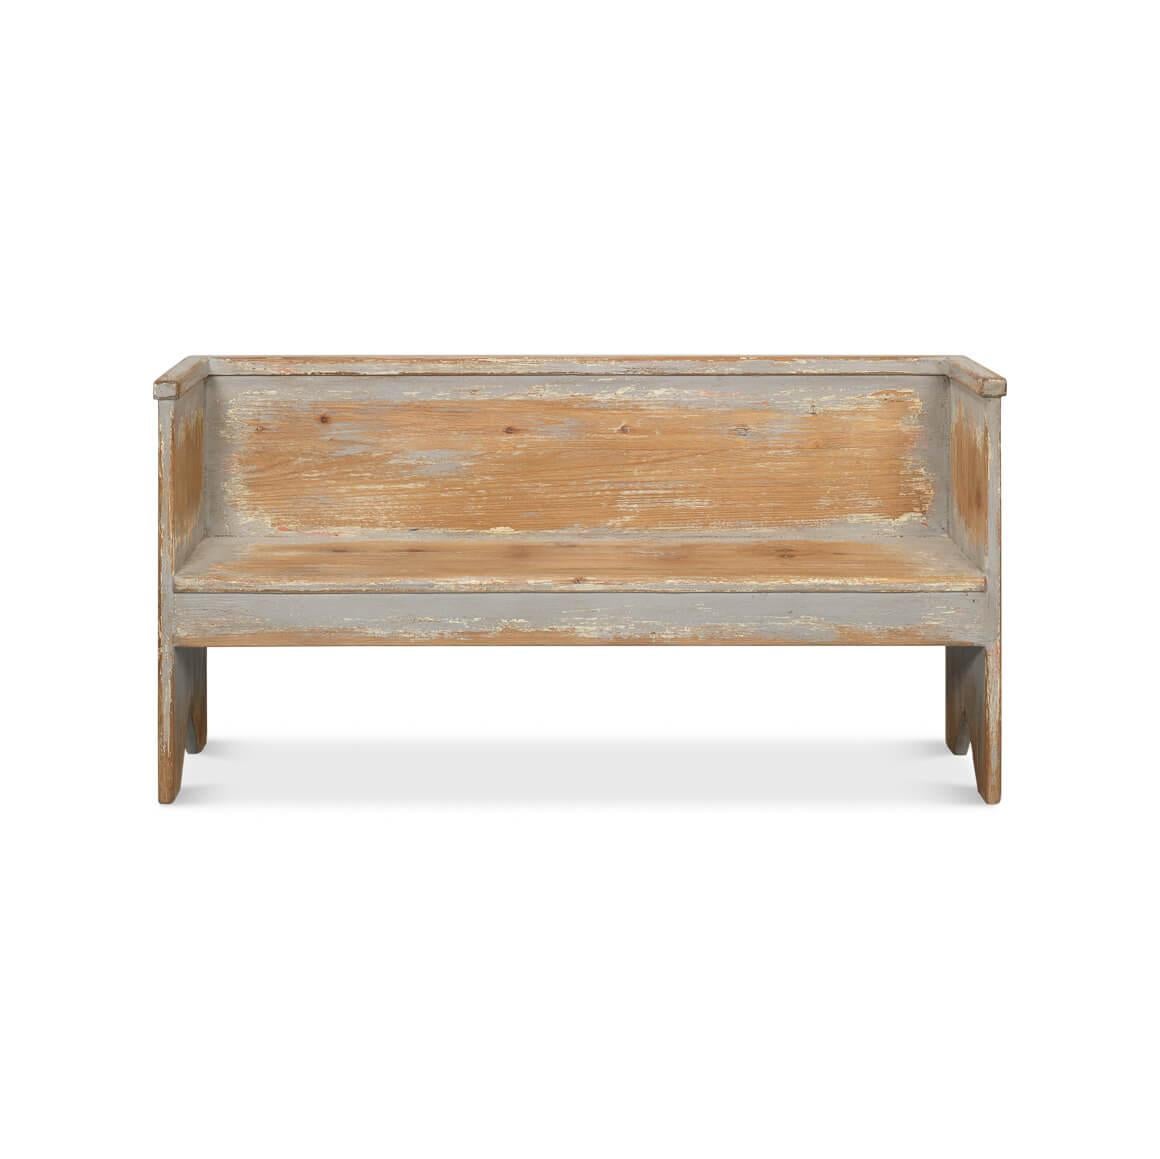 A harmonious blend of functionality and farmhouse charm. This cozy seating solution is designed to bring a touch of rustic warmth to your home. The distressed gray painted finish gives it a lived-in look, as if it's already hosted many a family